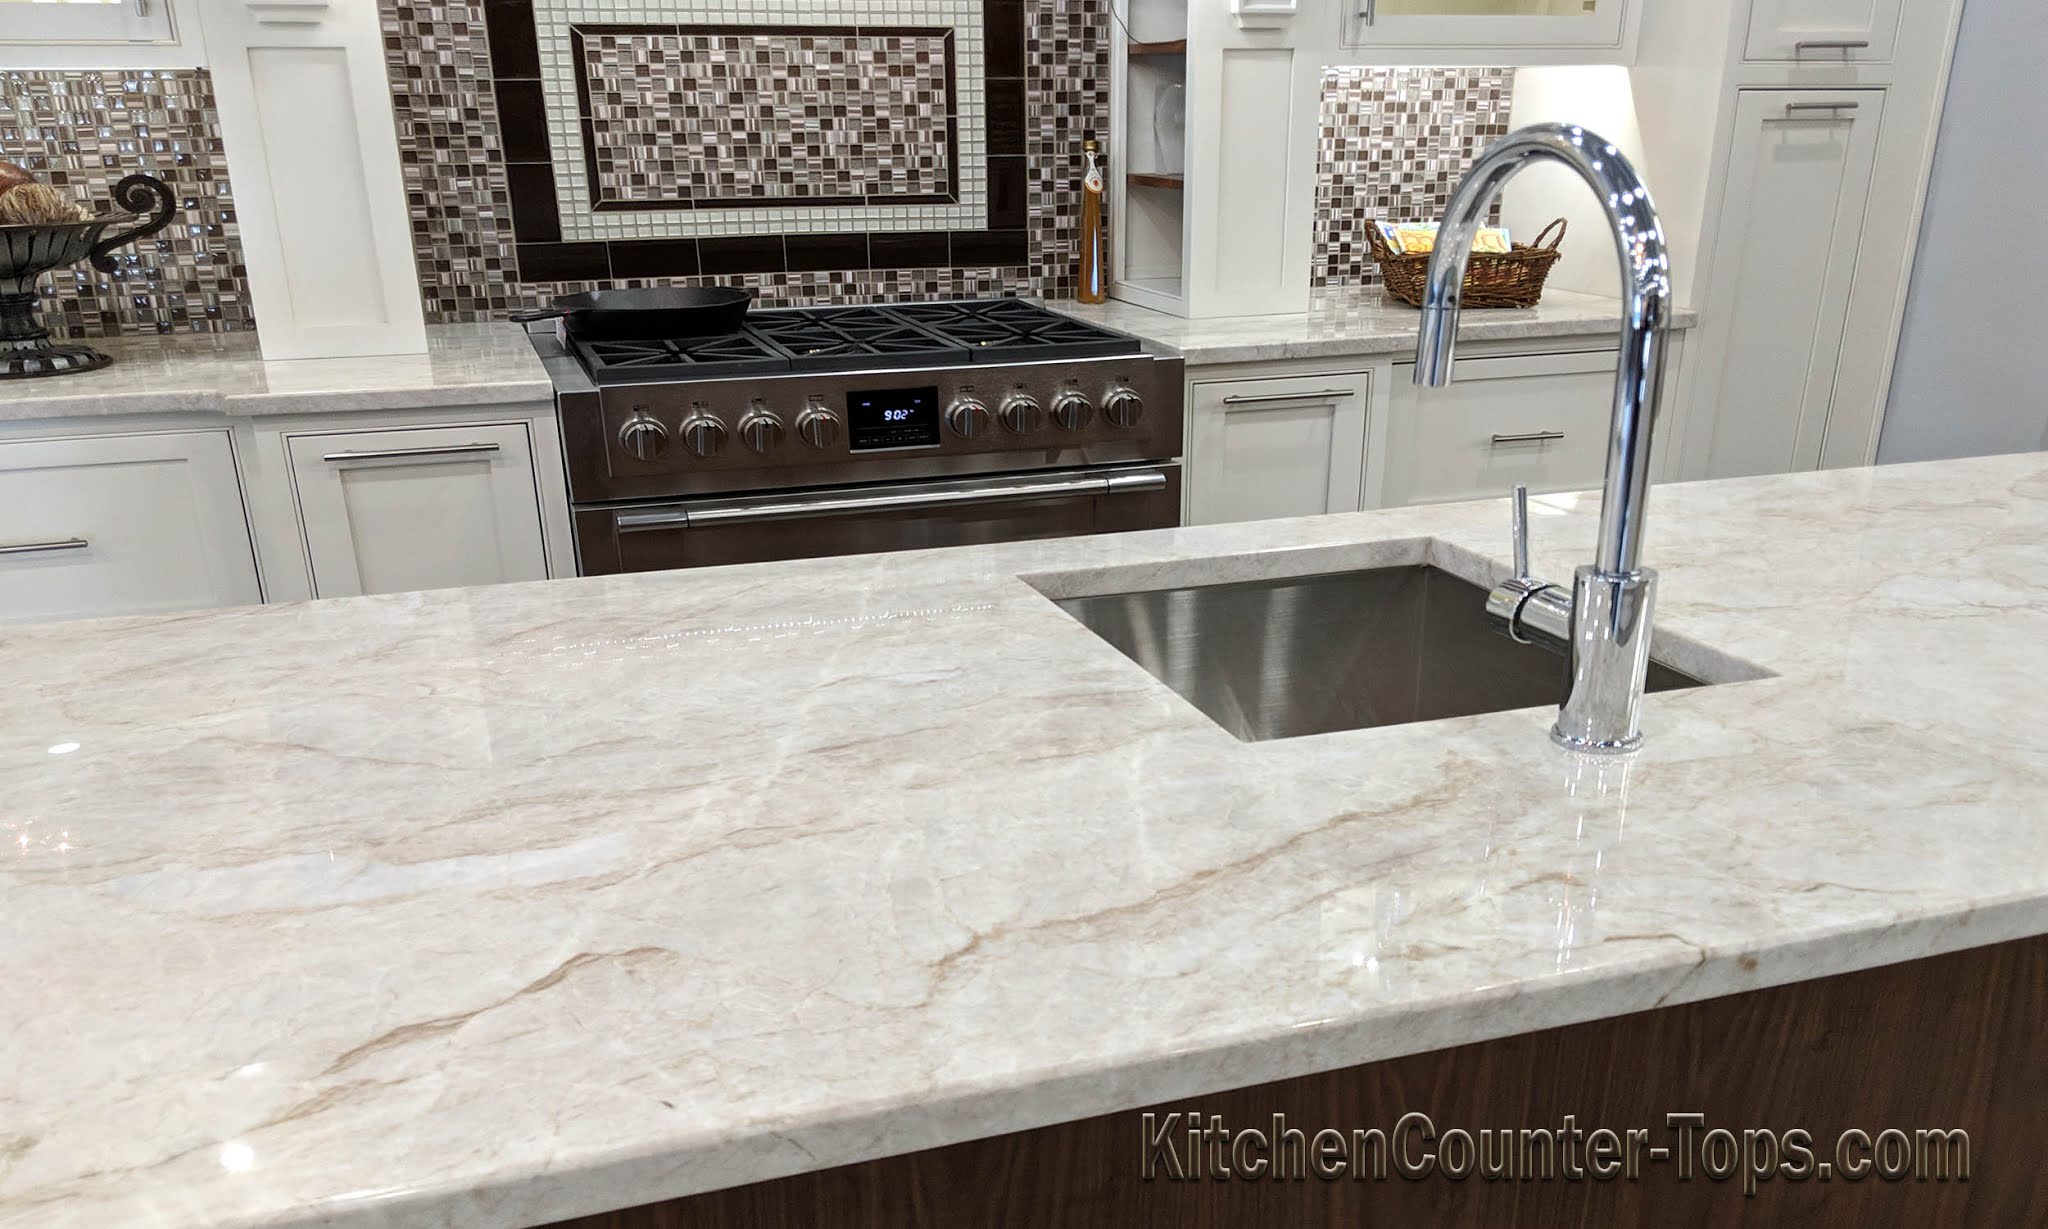 Quartzite Countertops For, What Not To Use On Quartzite Countertops